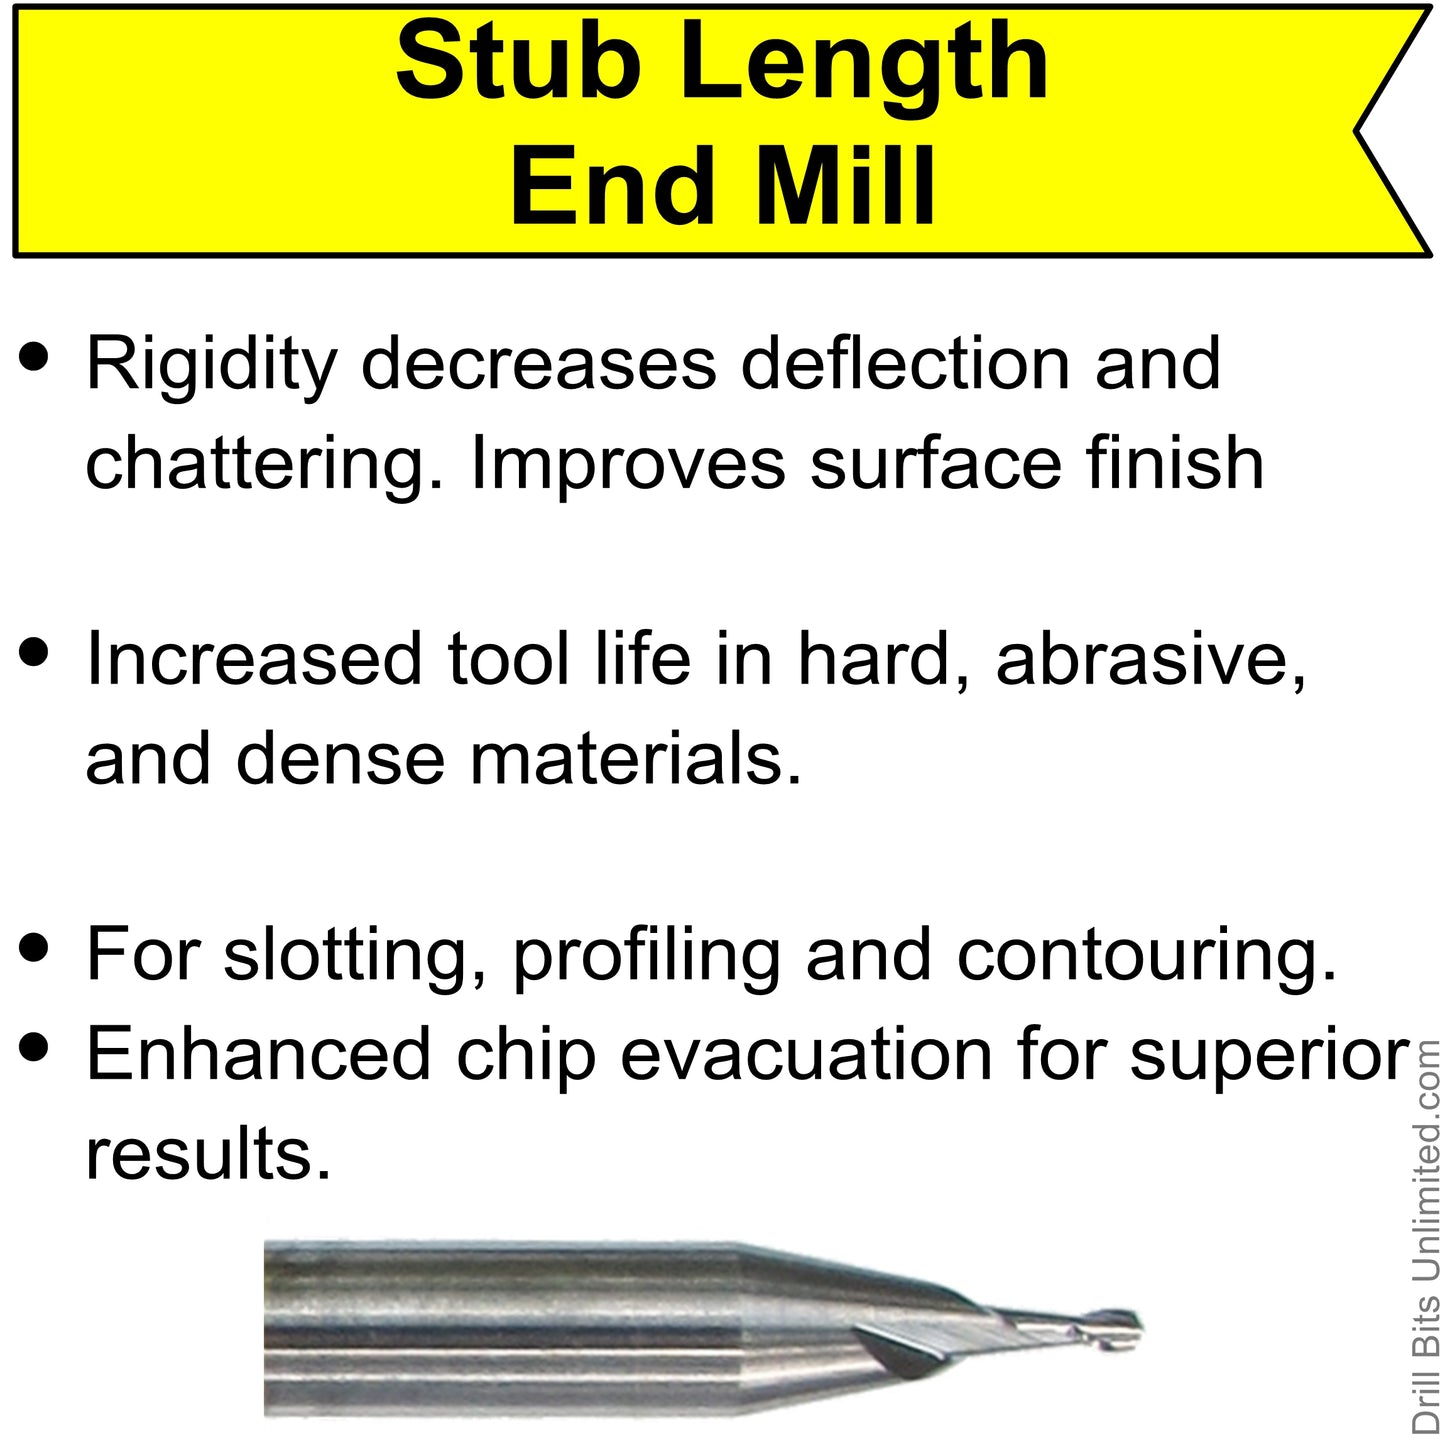 .050" x .075" LOC STUB length Two Flute UP Cut Carbide End Mill Square End - Made in U.S.A. M050ST